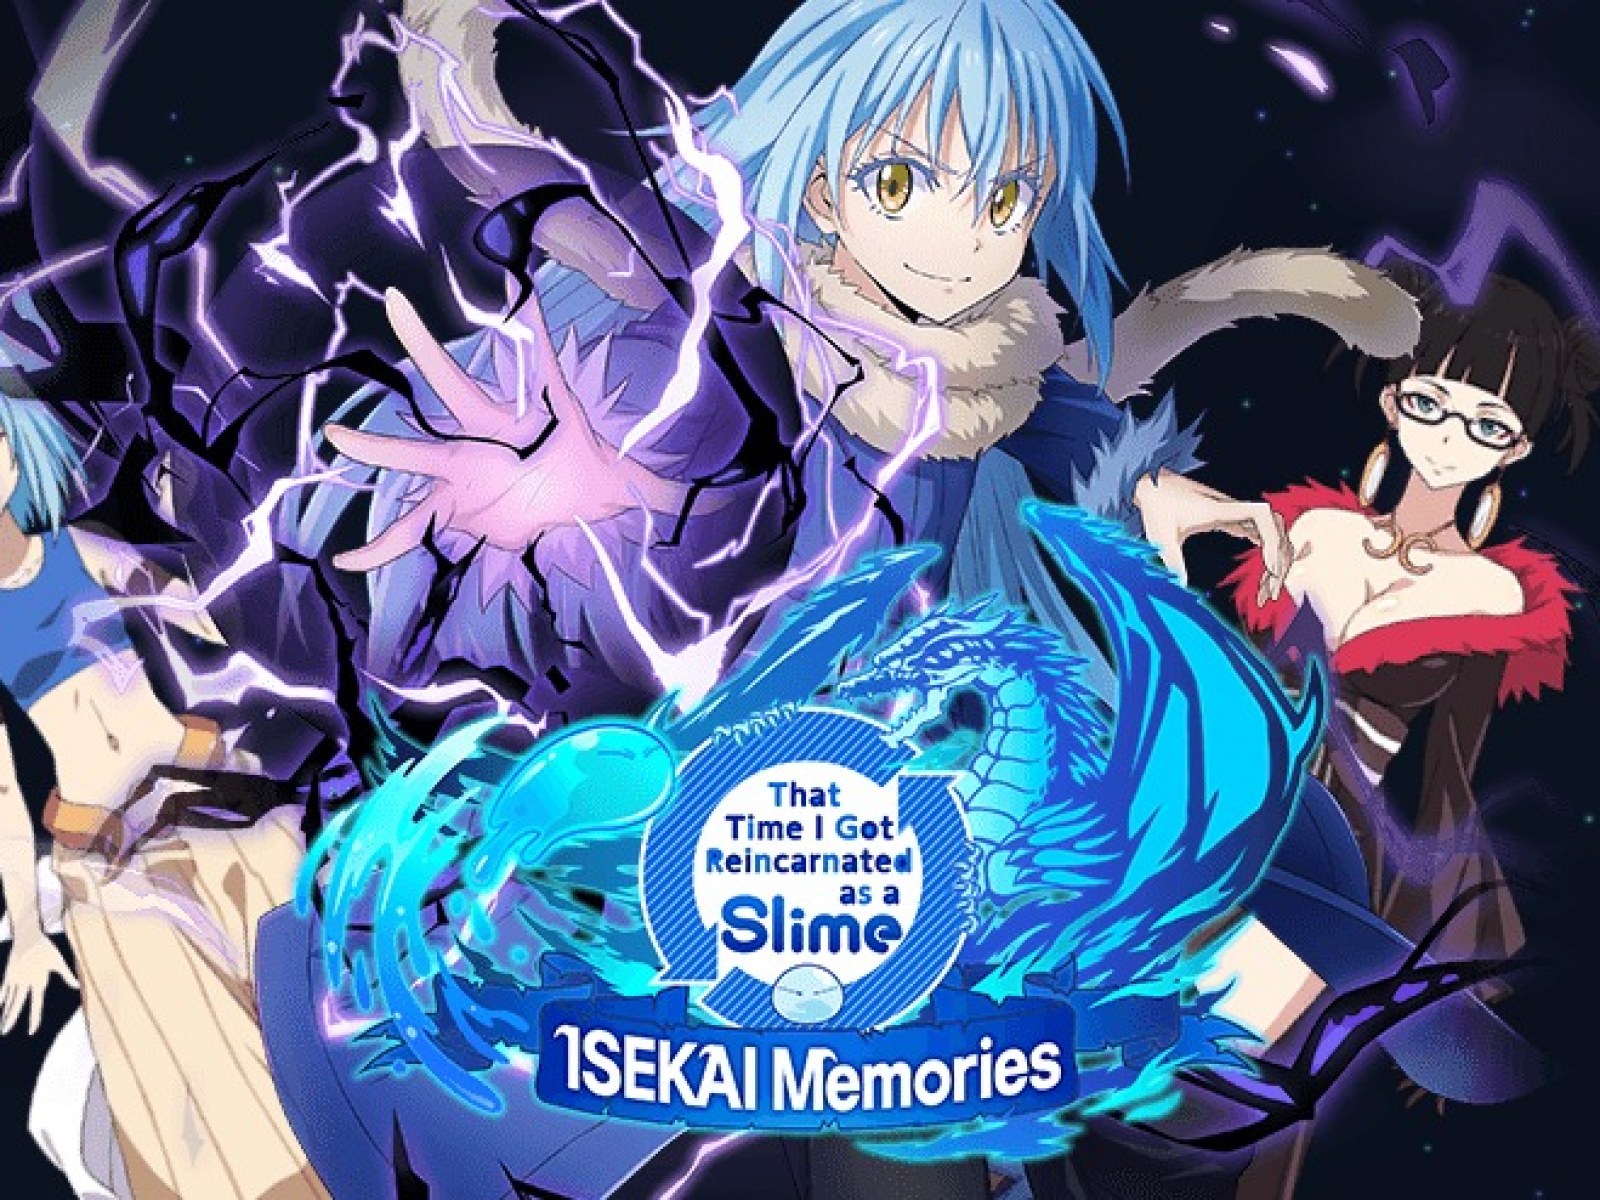 How to Play the 'That Time I Got Reincarnated as a Slime: ISEKAI Memories'  Game